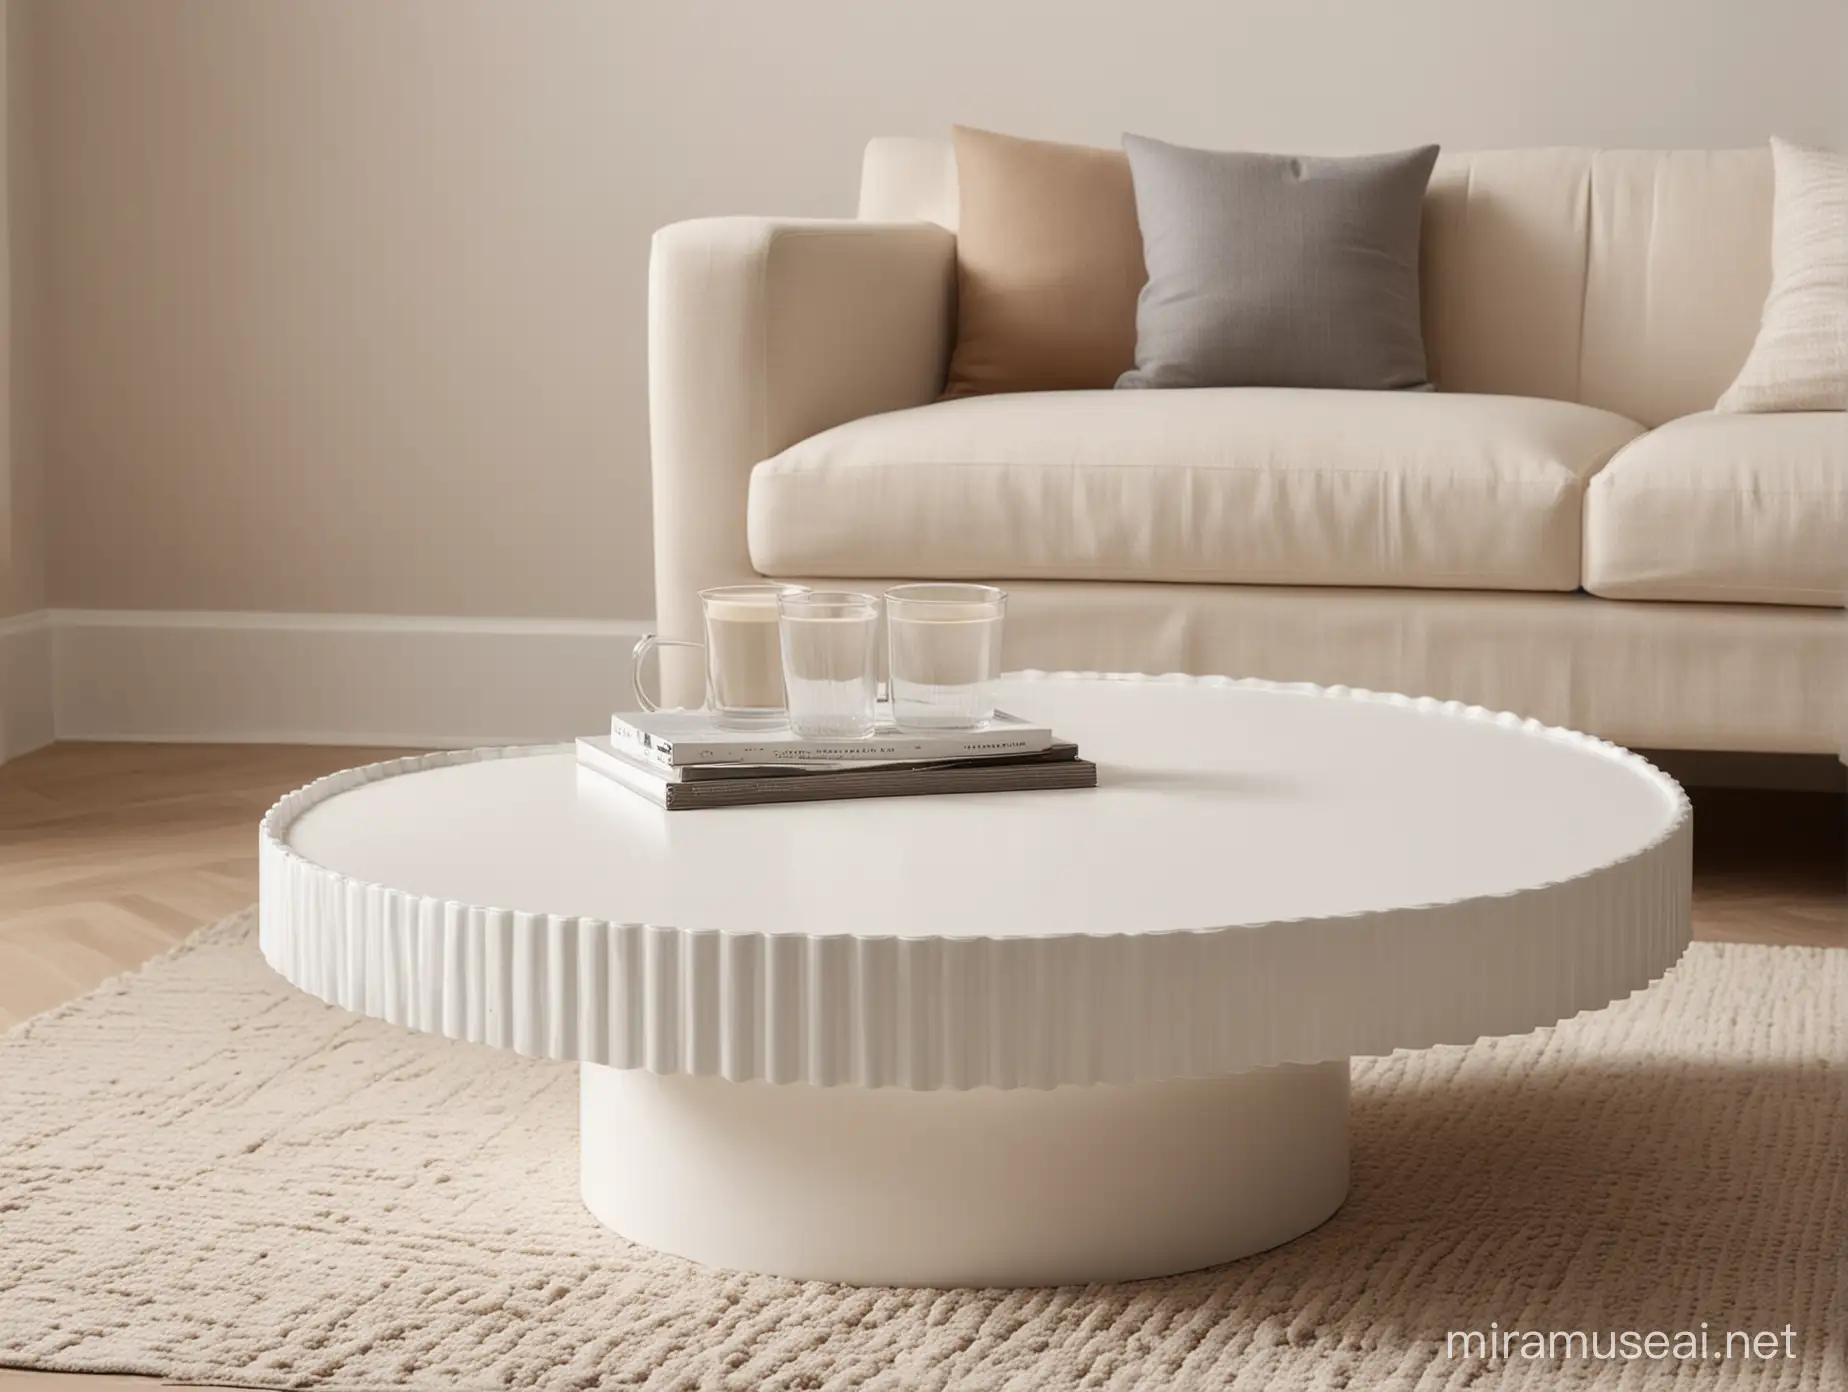 lifestyle setting for product placement A product photography picture of a white circle fluted coffee table with a minimal decoration blurred background